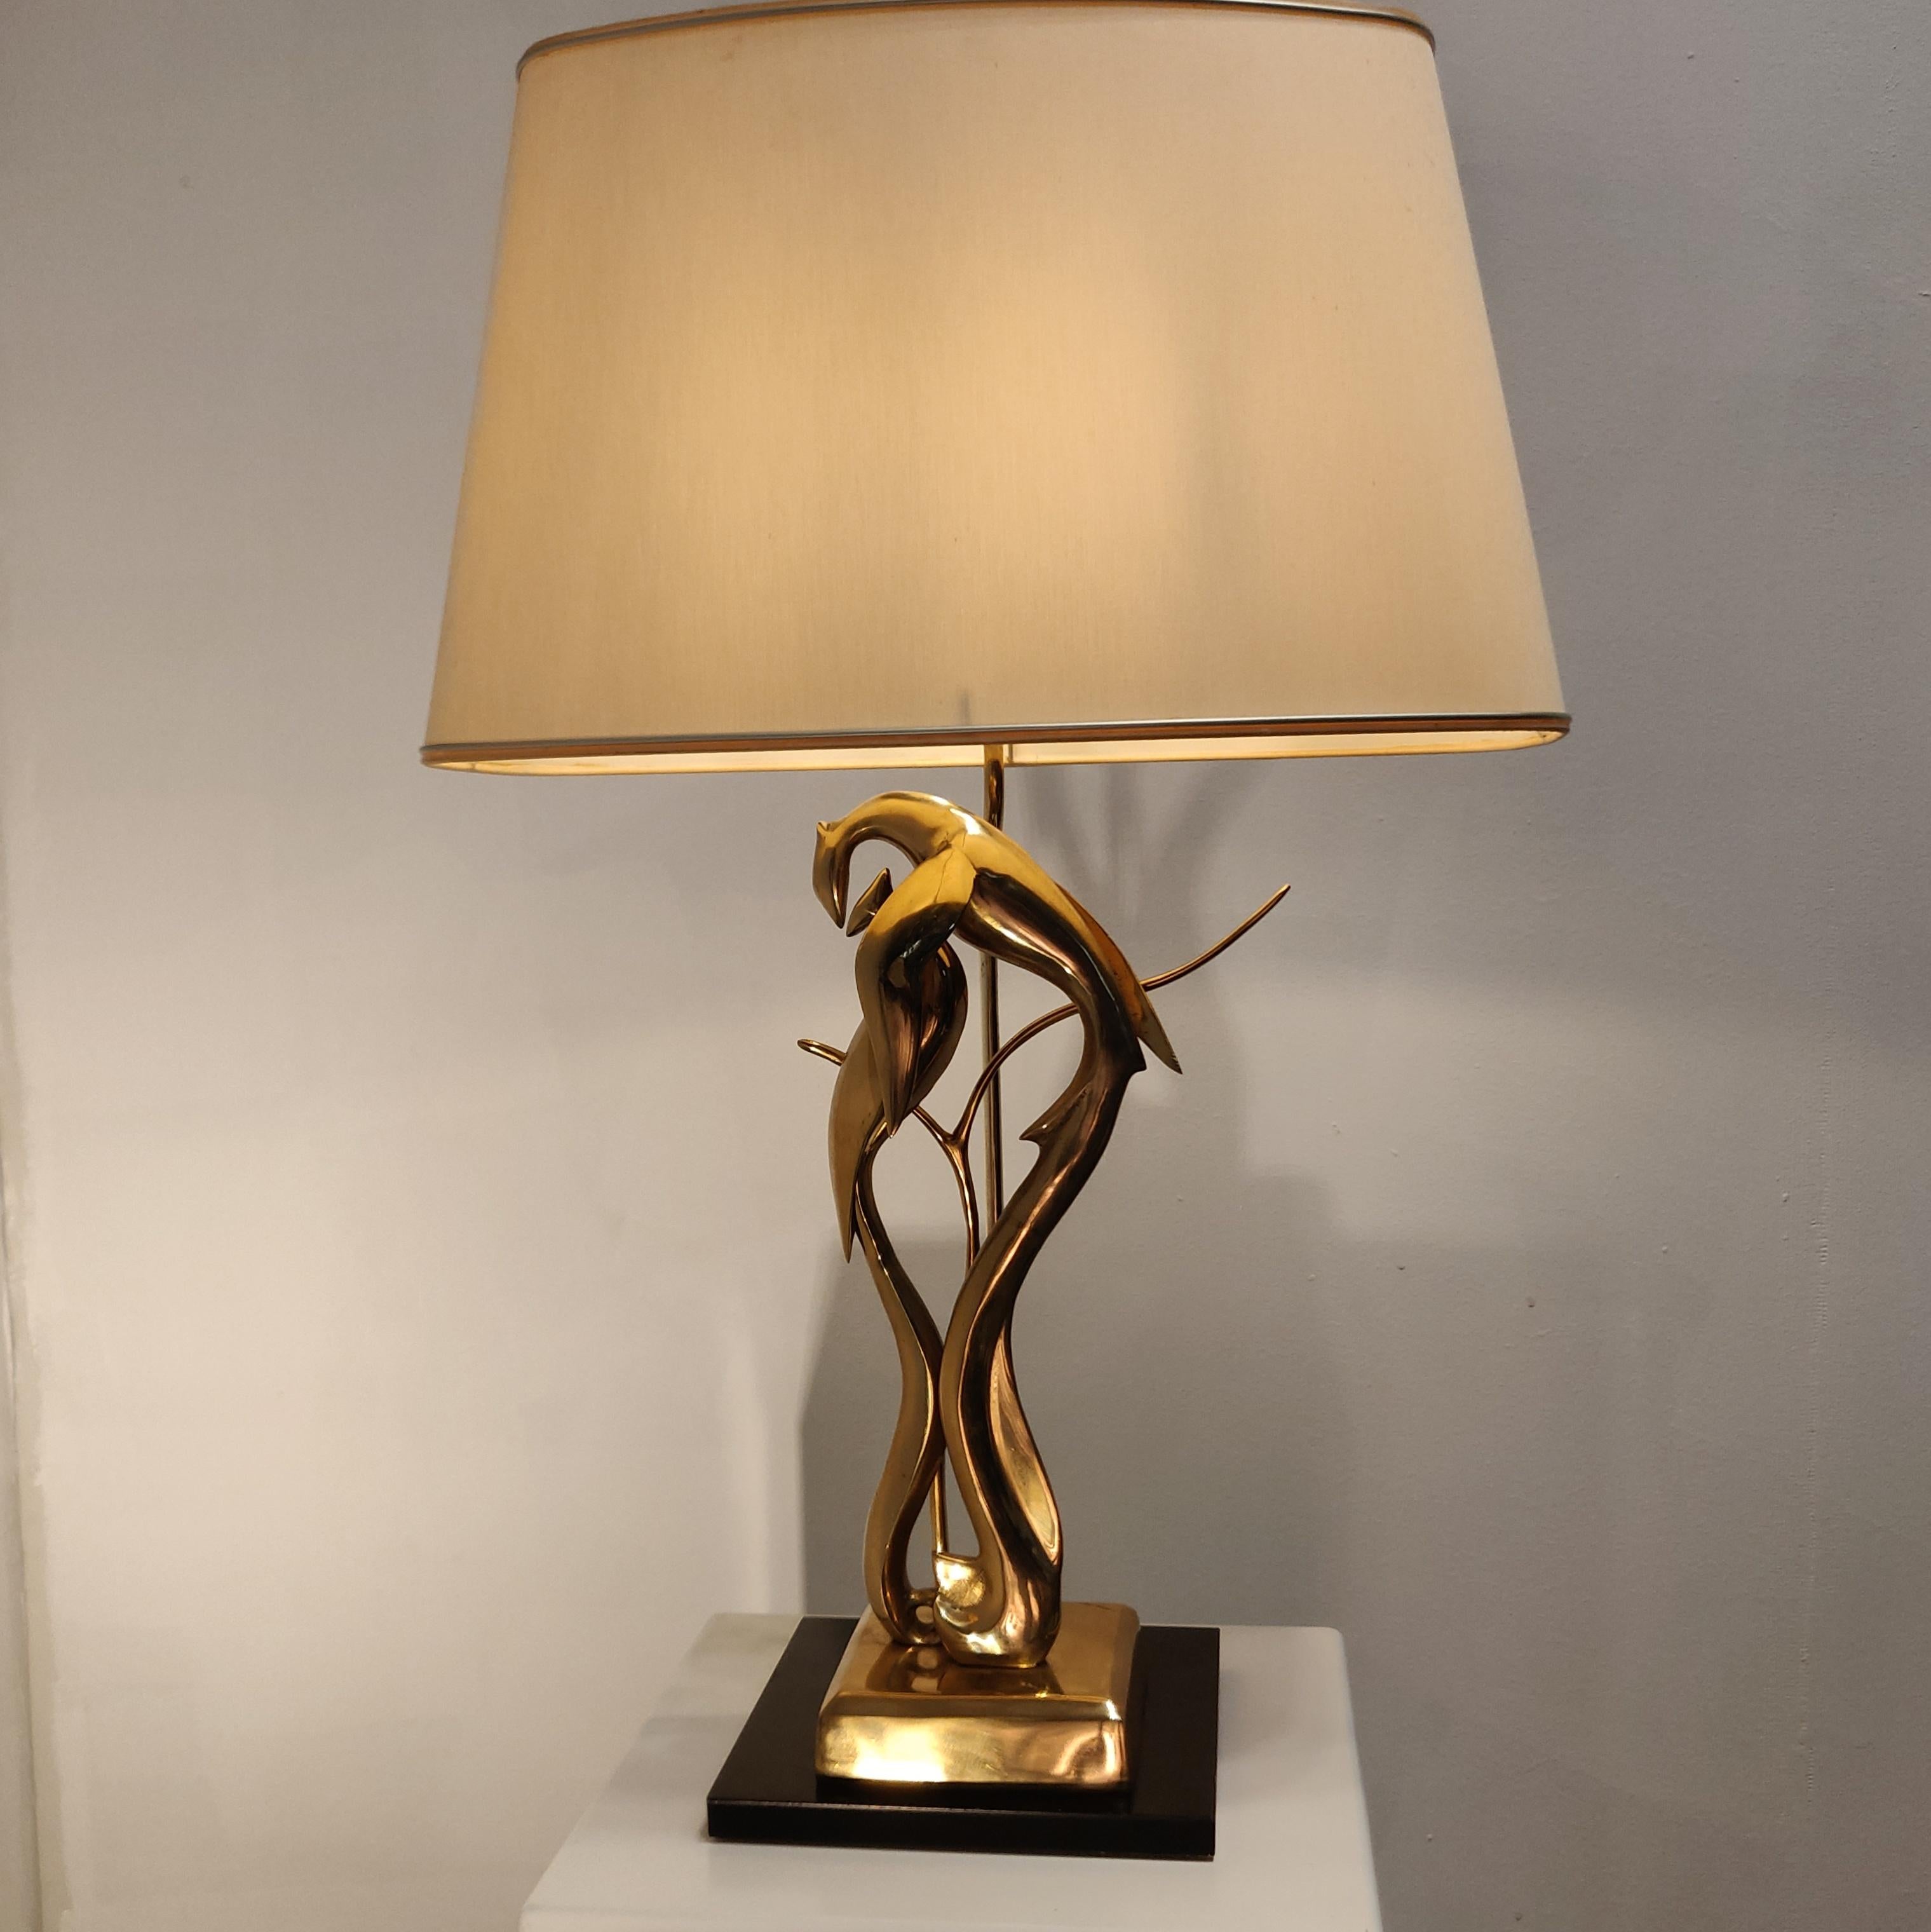 Mid-Century Modern, Hollywood Regency style large brass sculpture table lamp, Regina, Italy, 1970s.
 
Solid brass sculpture base with original shade.

The sculpture is a abstract bird mother protecting her child with her wings.

Dimensions of